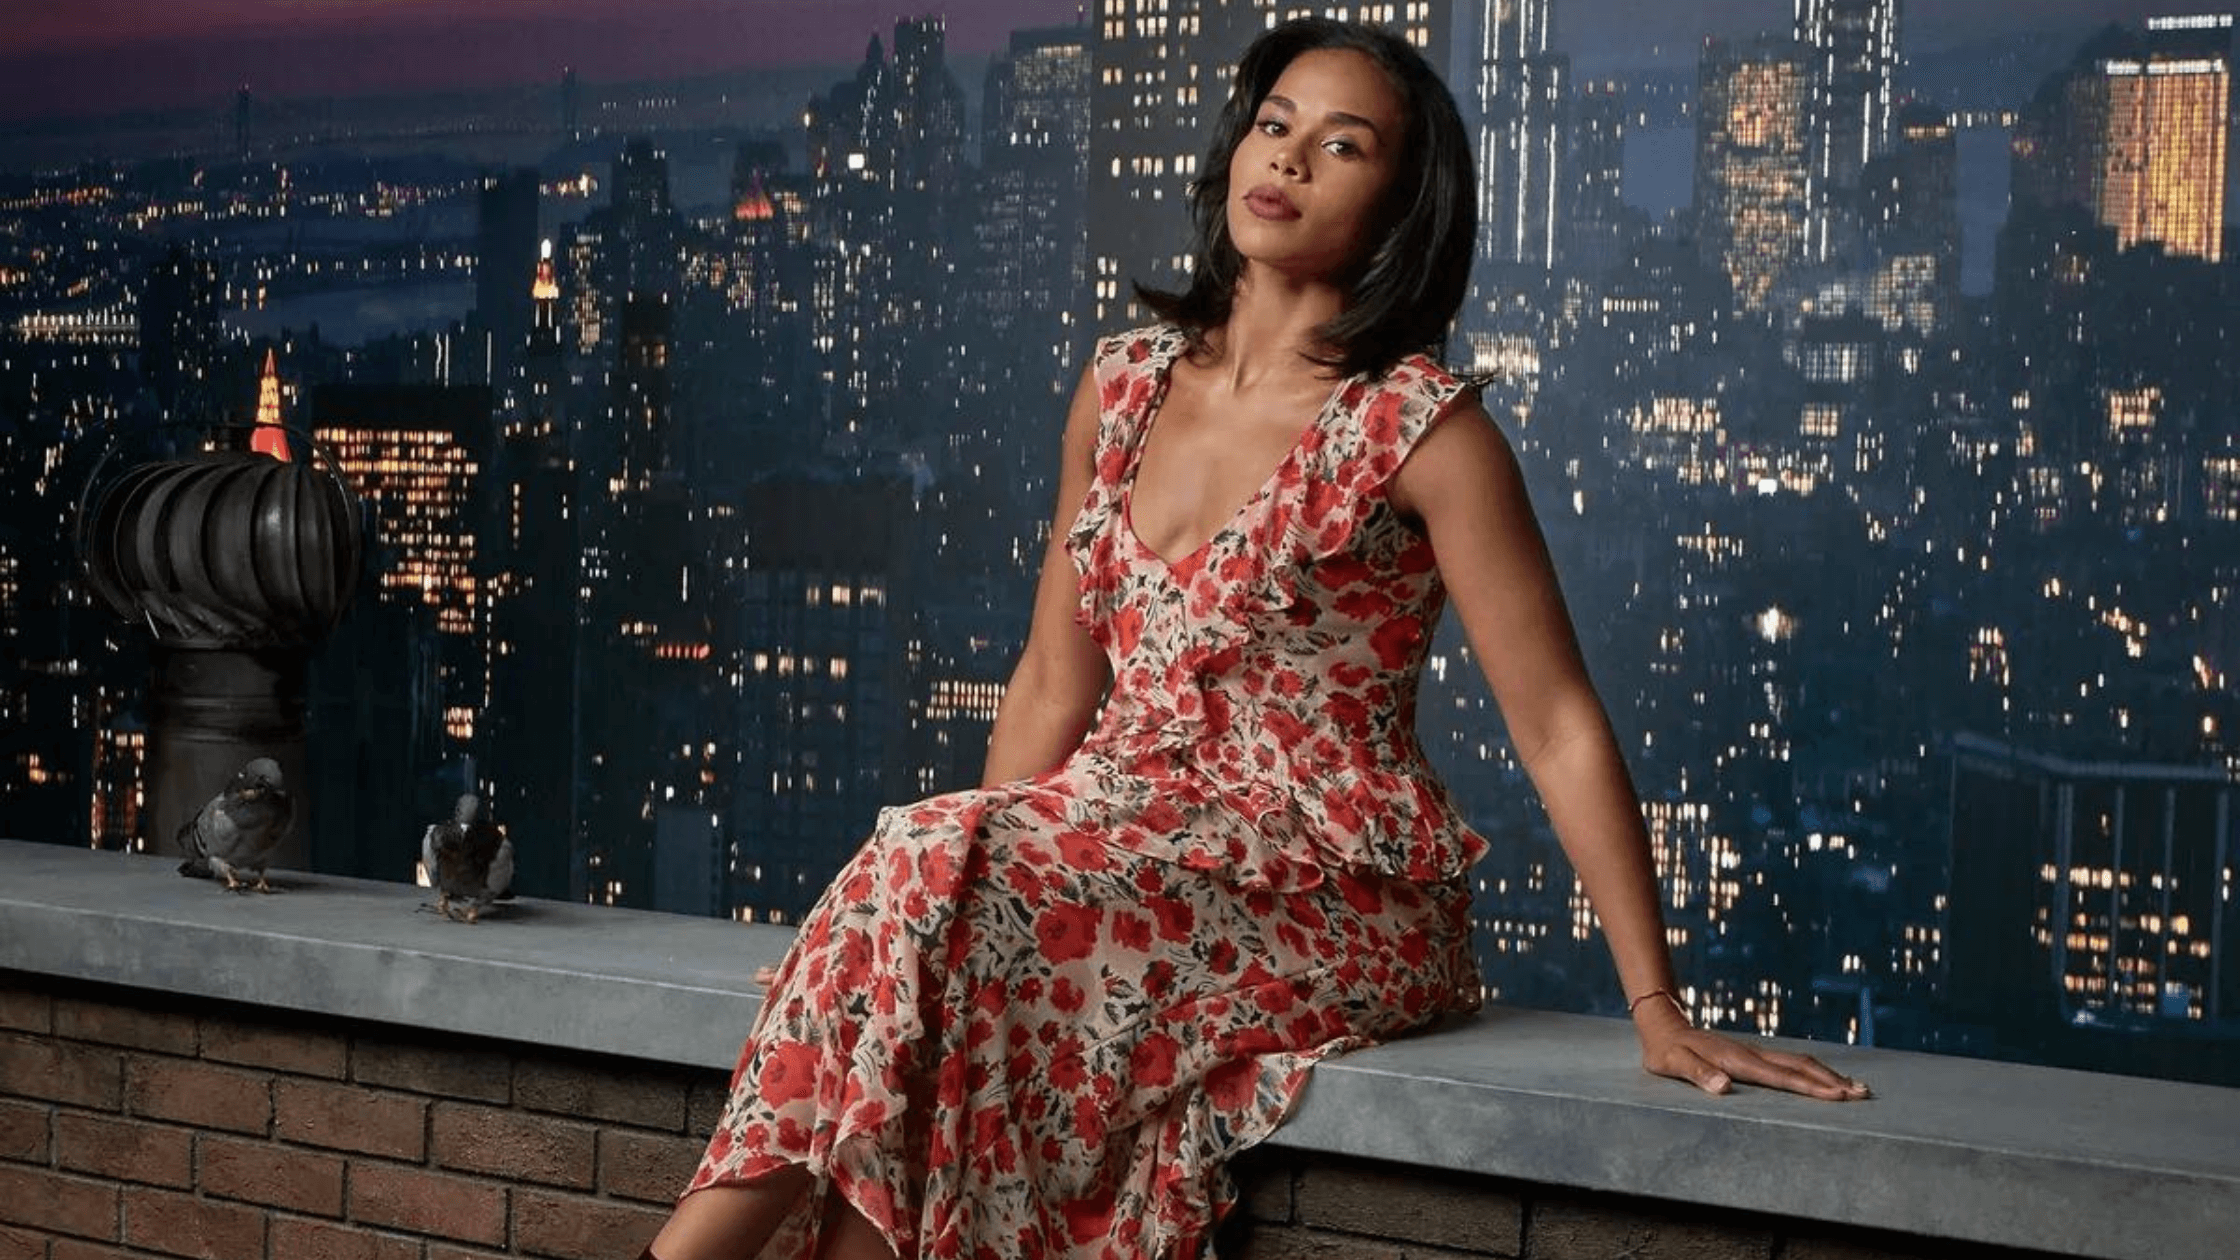 Every Thing To Know About The Most Impressive British Actress Roxy Sternberg! Husband, Bio, Age, And Net Worth